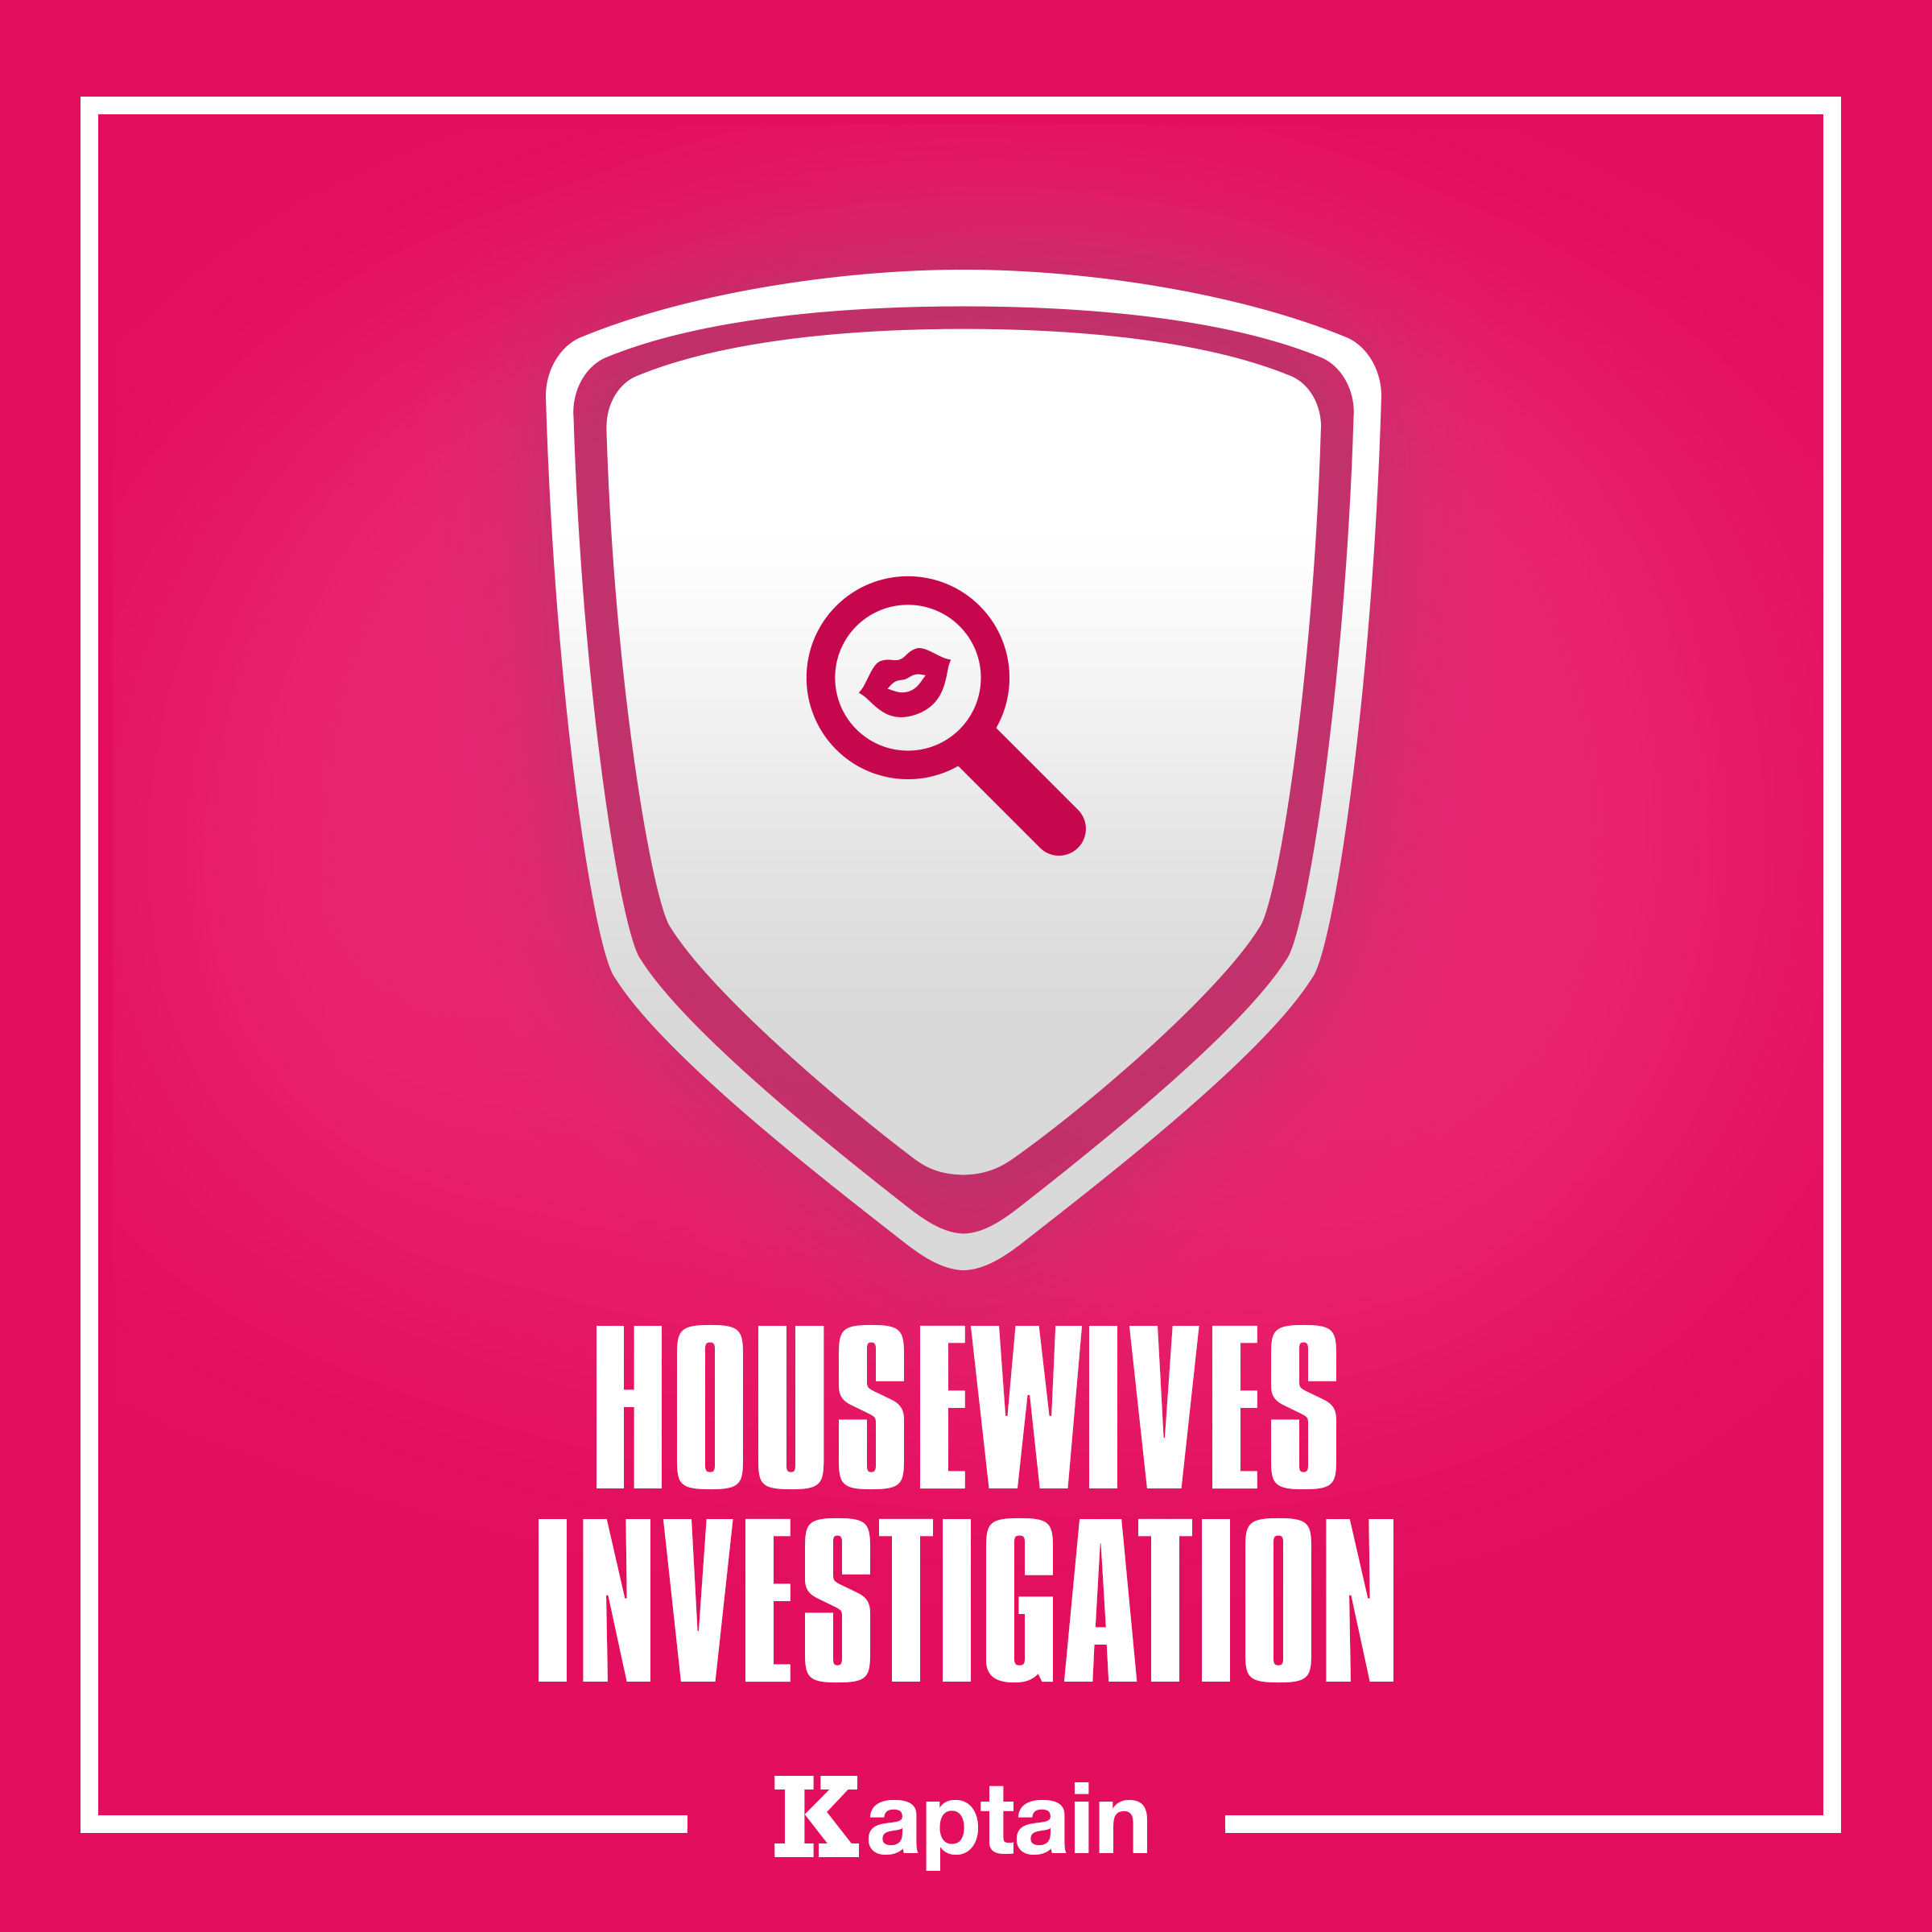 Housewives Investigation